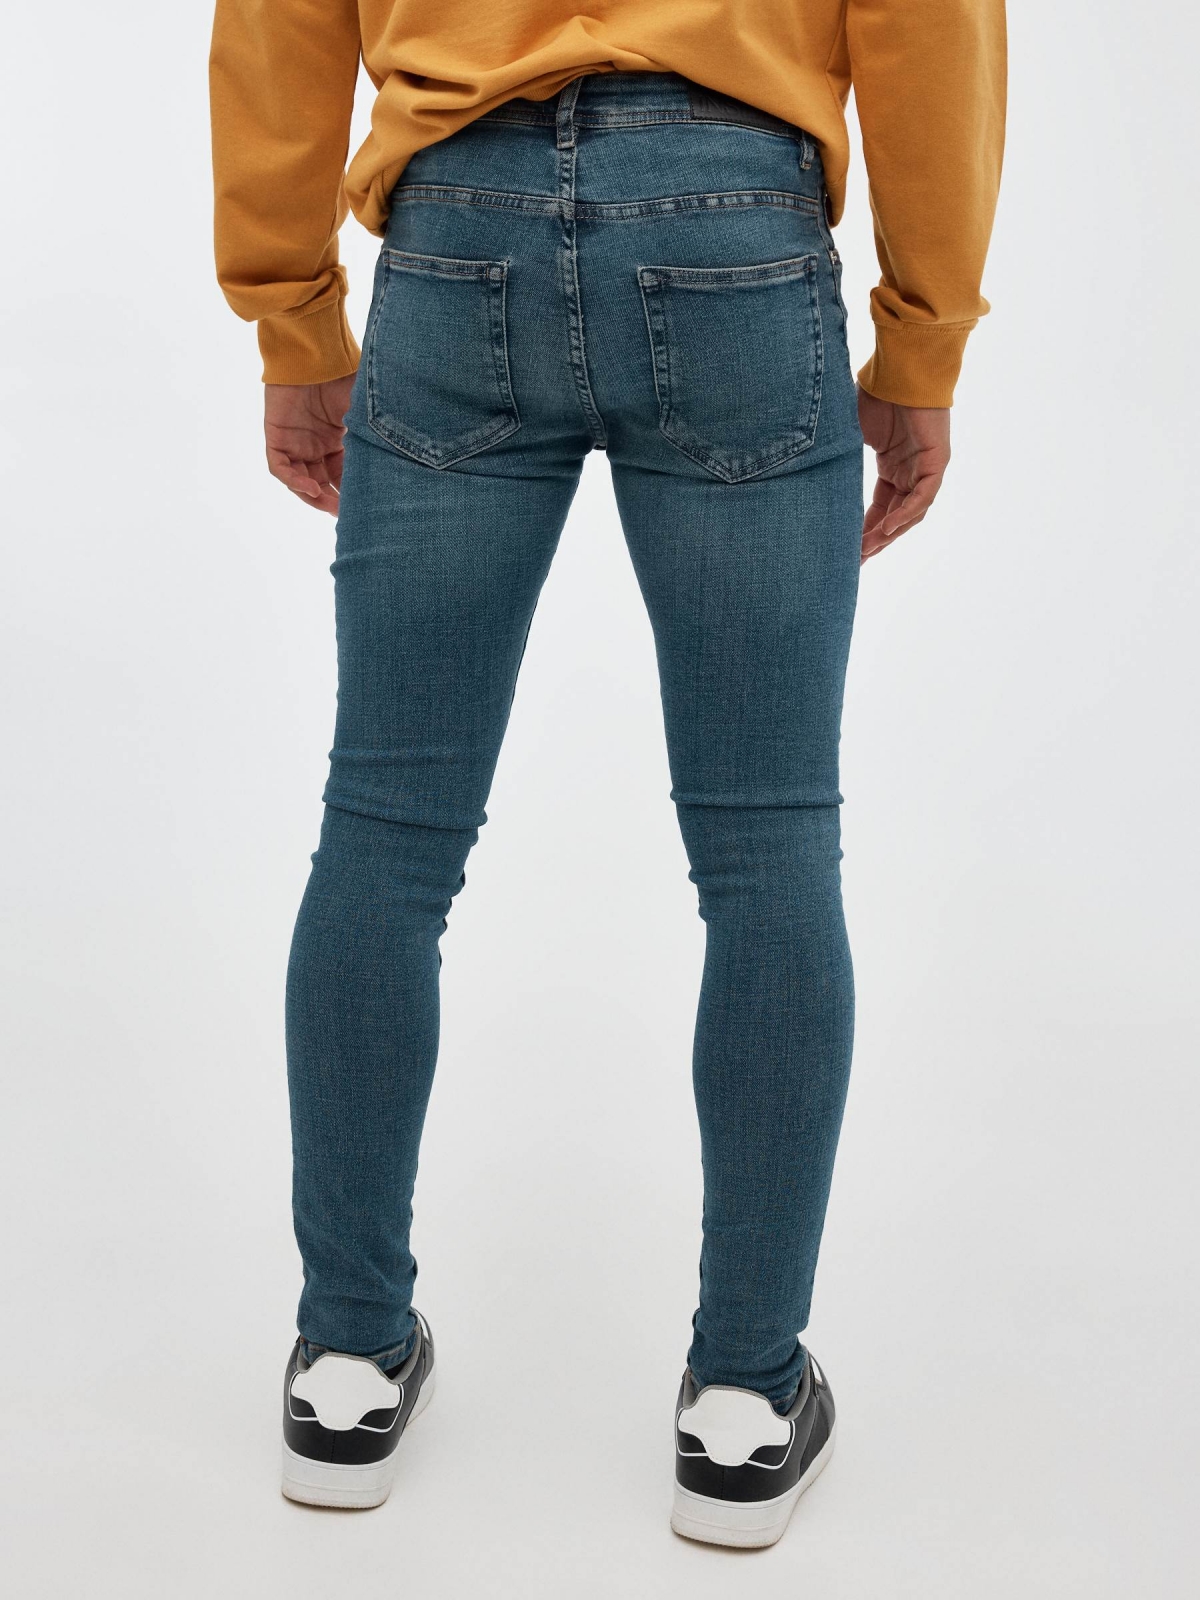 Blue skinny jeans low rise blue middle back view